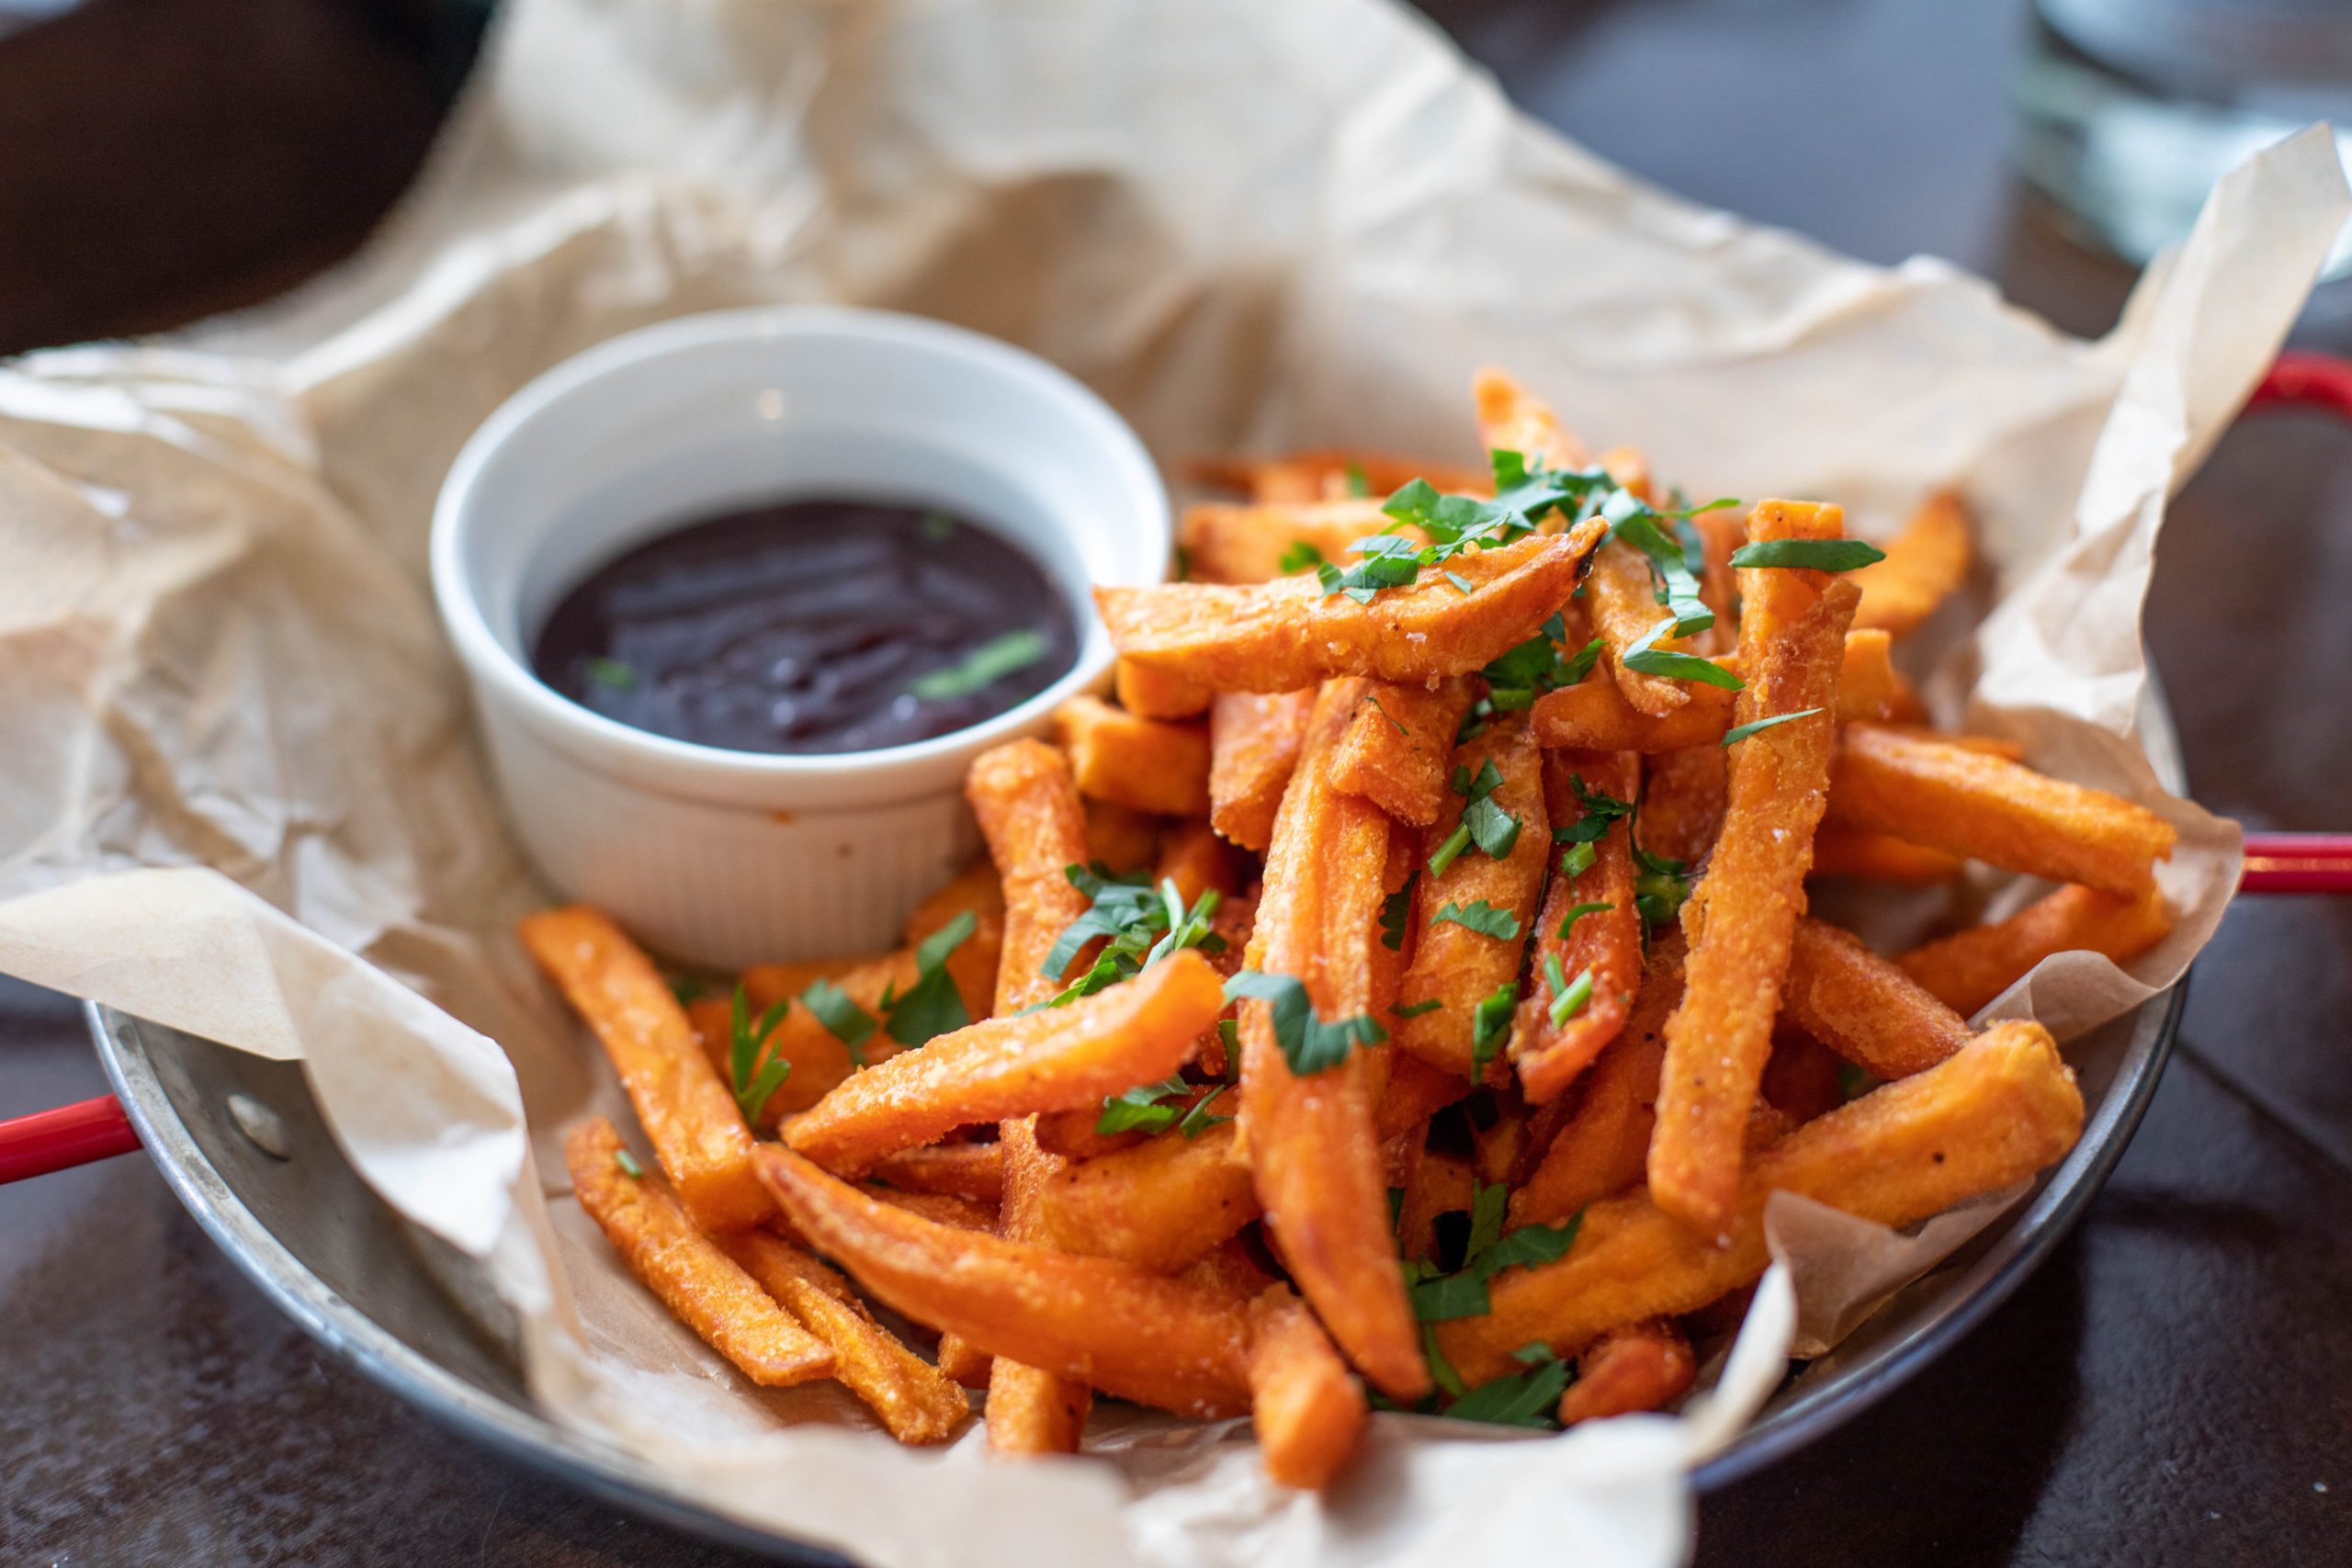 Bowl of sweet potato fries with a dip. Carbohydrates are an important source of energy for the body.